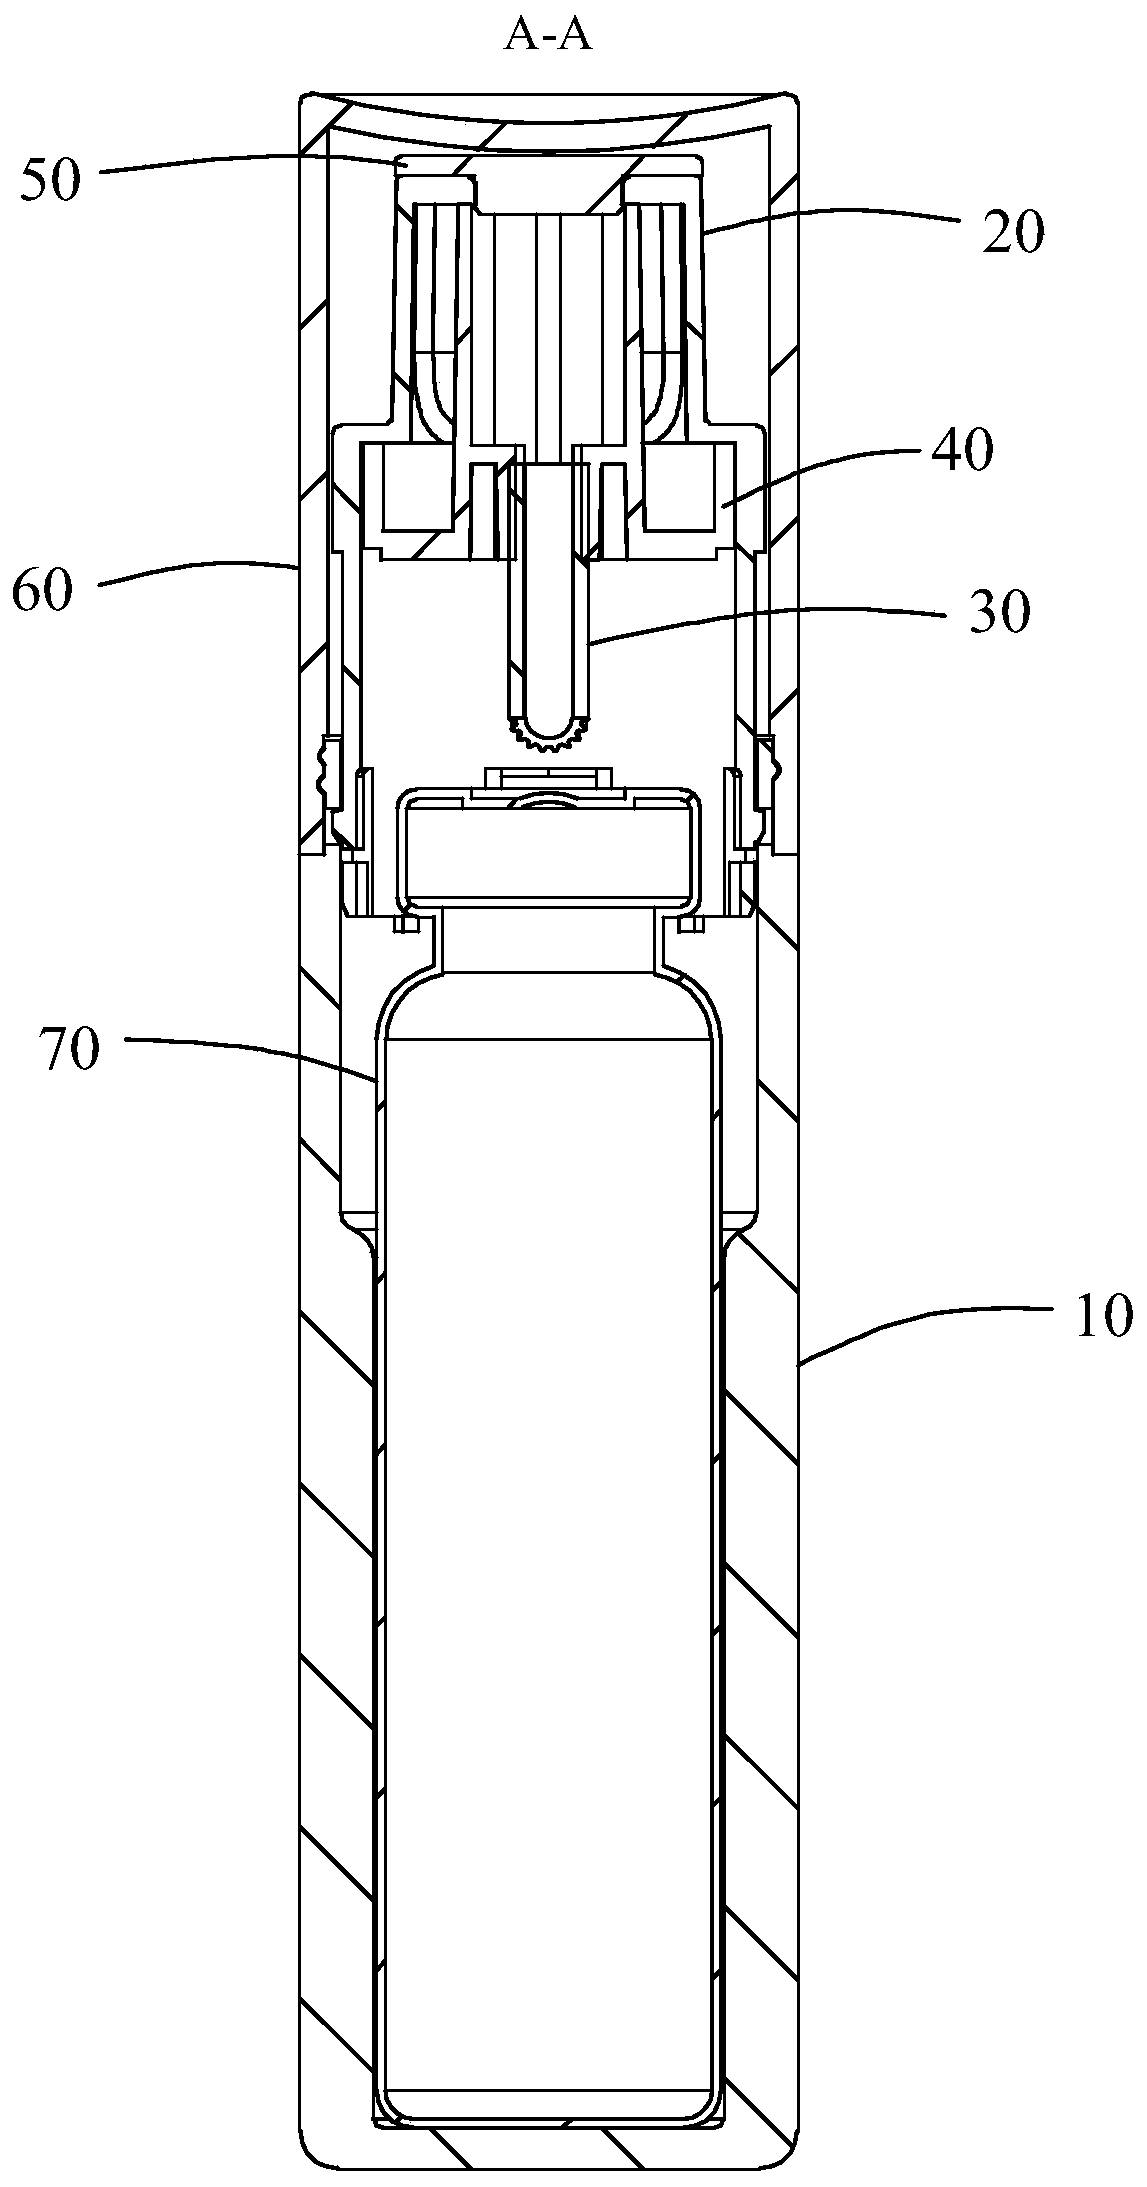 Oral liquid drinking device and oral liquid packaging device